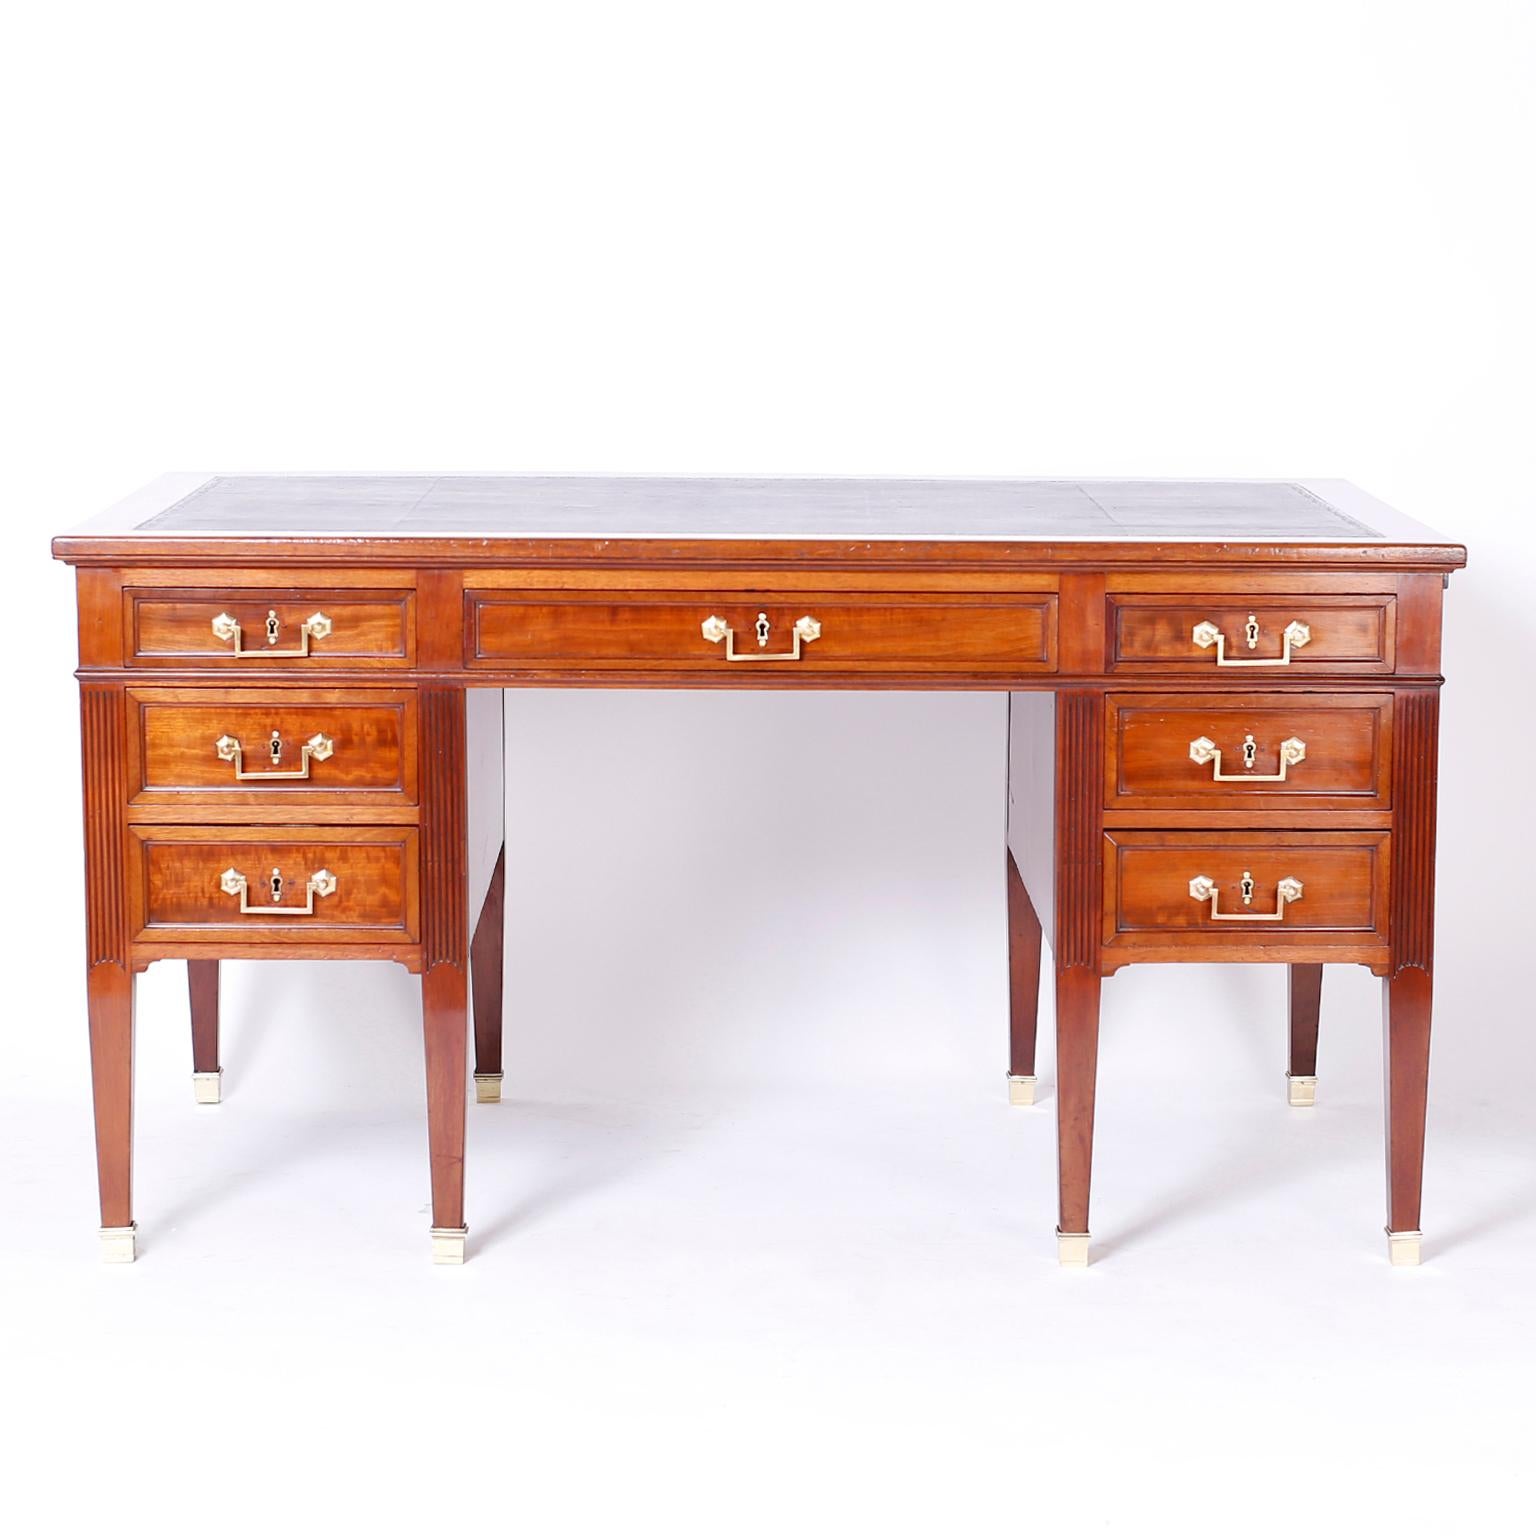 19th century English mahogany seven drawer desk featuring a tooled brown leather top, two leather top pull out trays, handmade construction, brass hardware, finished back, and an elegant classic form.

Kneehole width: 23